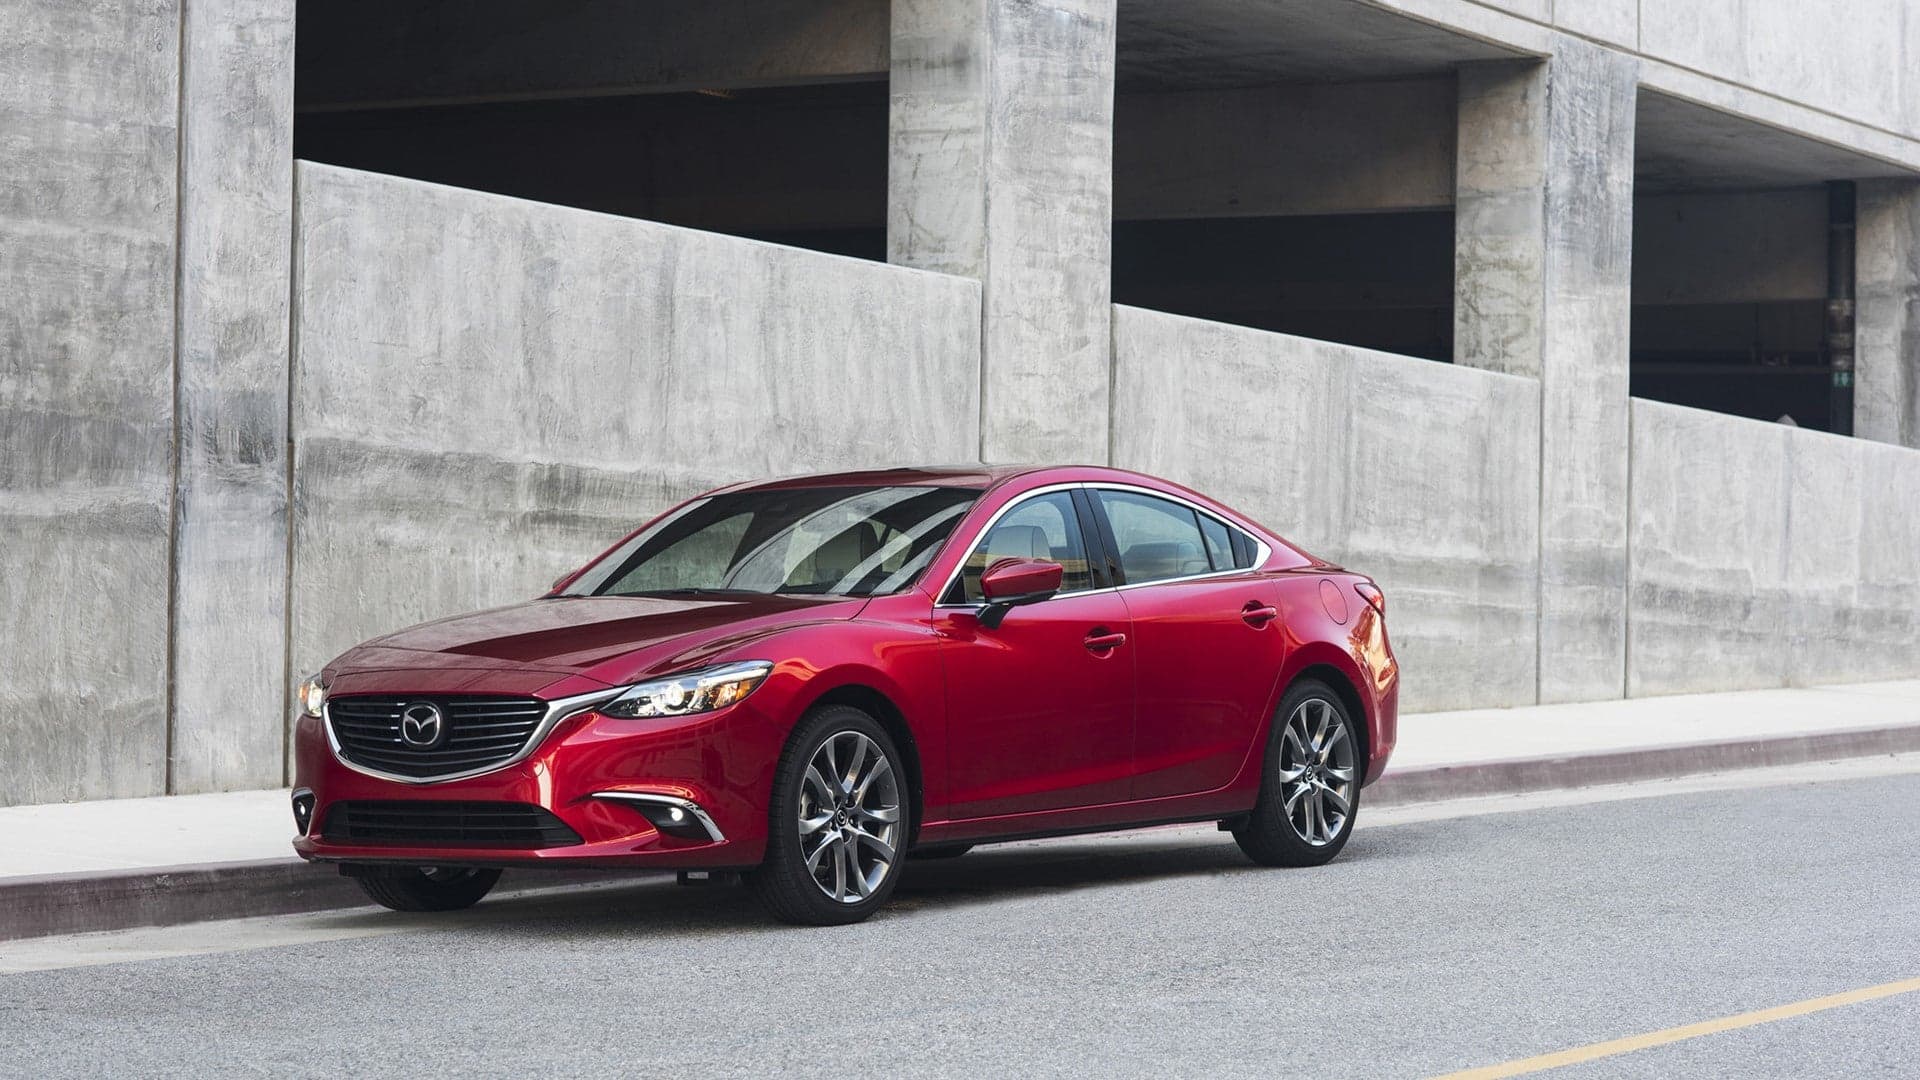 2017.5 Mazda6 Adds Luxury to an Affordable Sedan